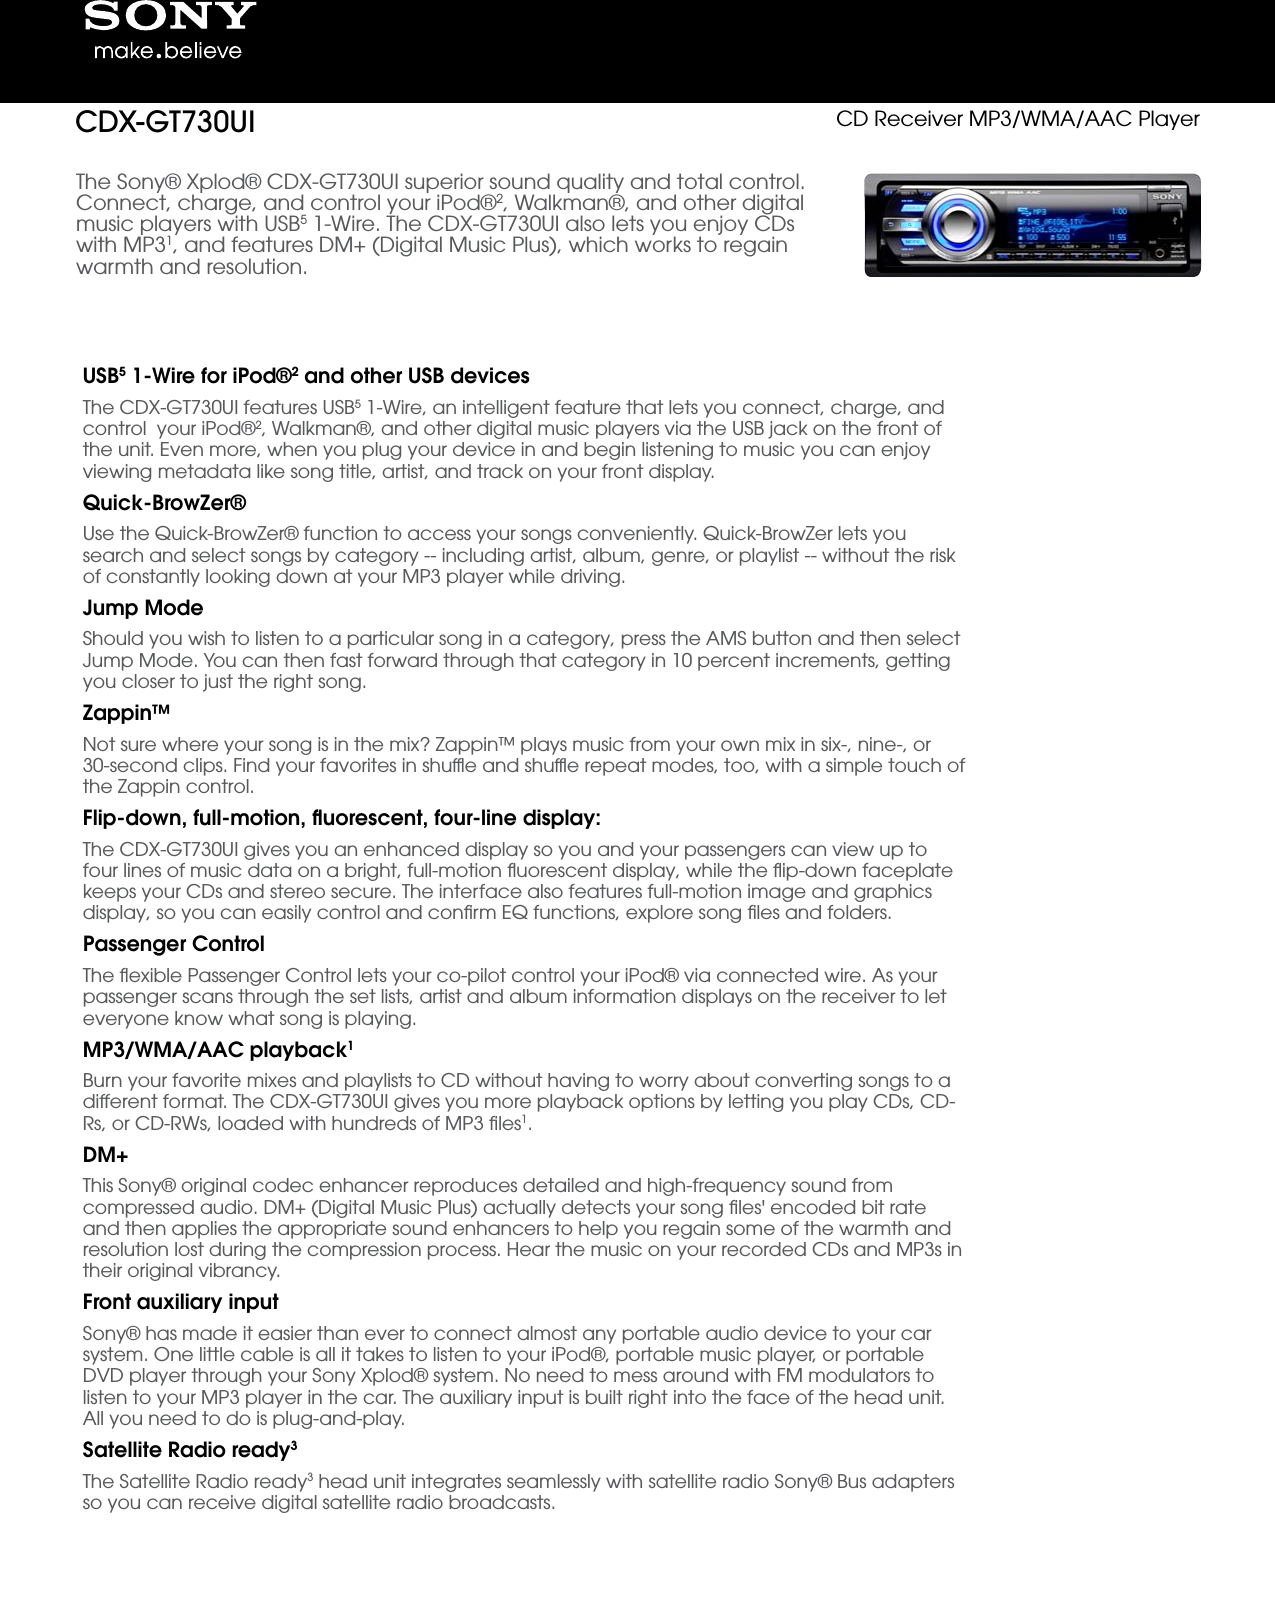 Page 1 of 4 - Sony CDX-GT730UI User Manual Marketing Specifications CDXGT730UI Mksp